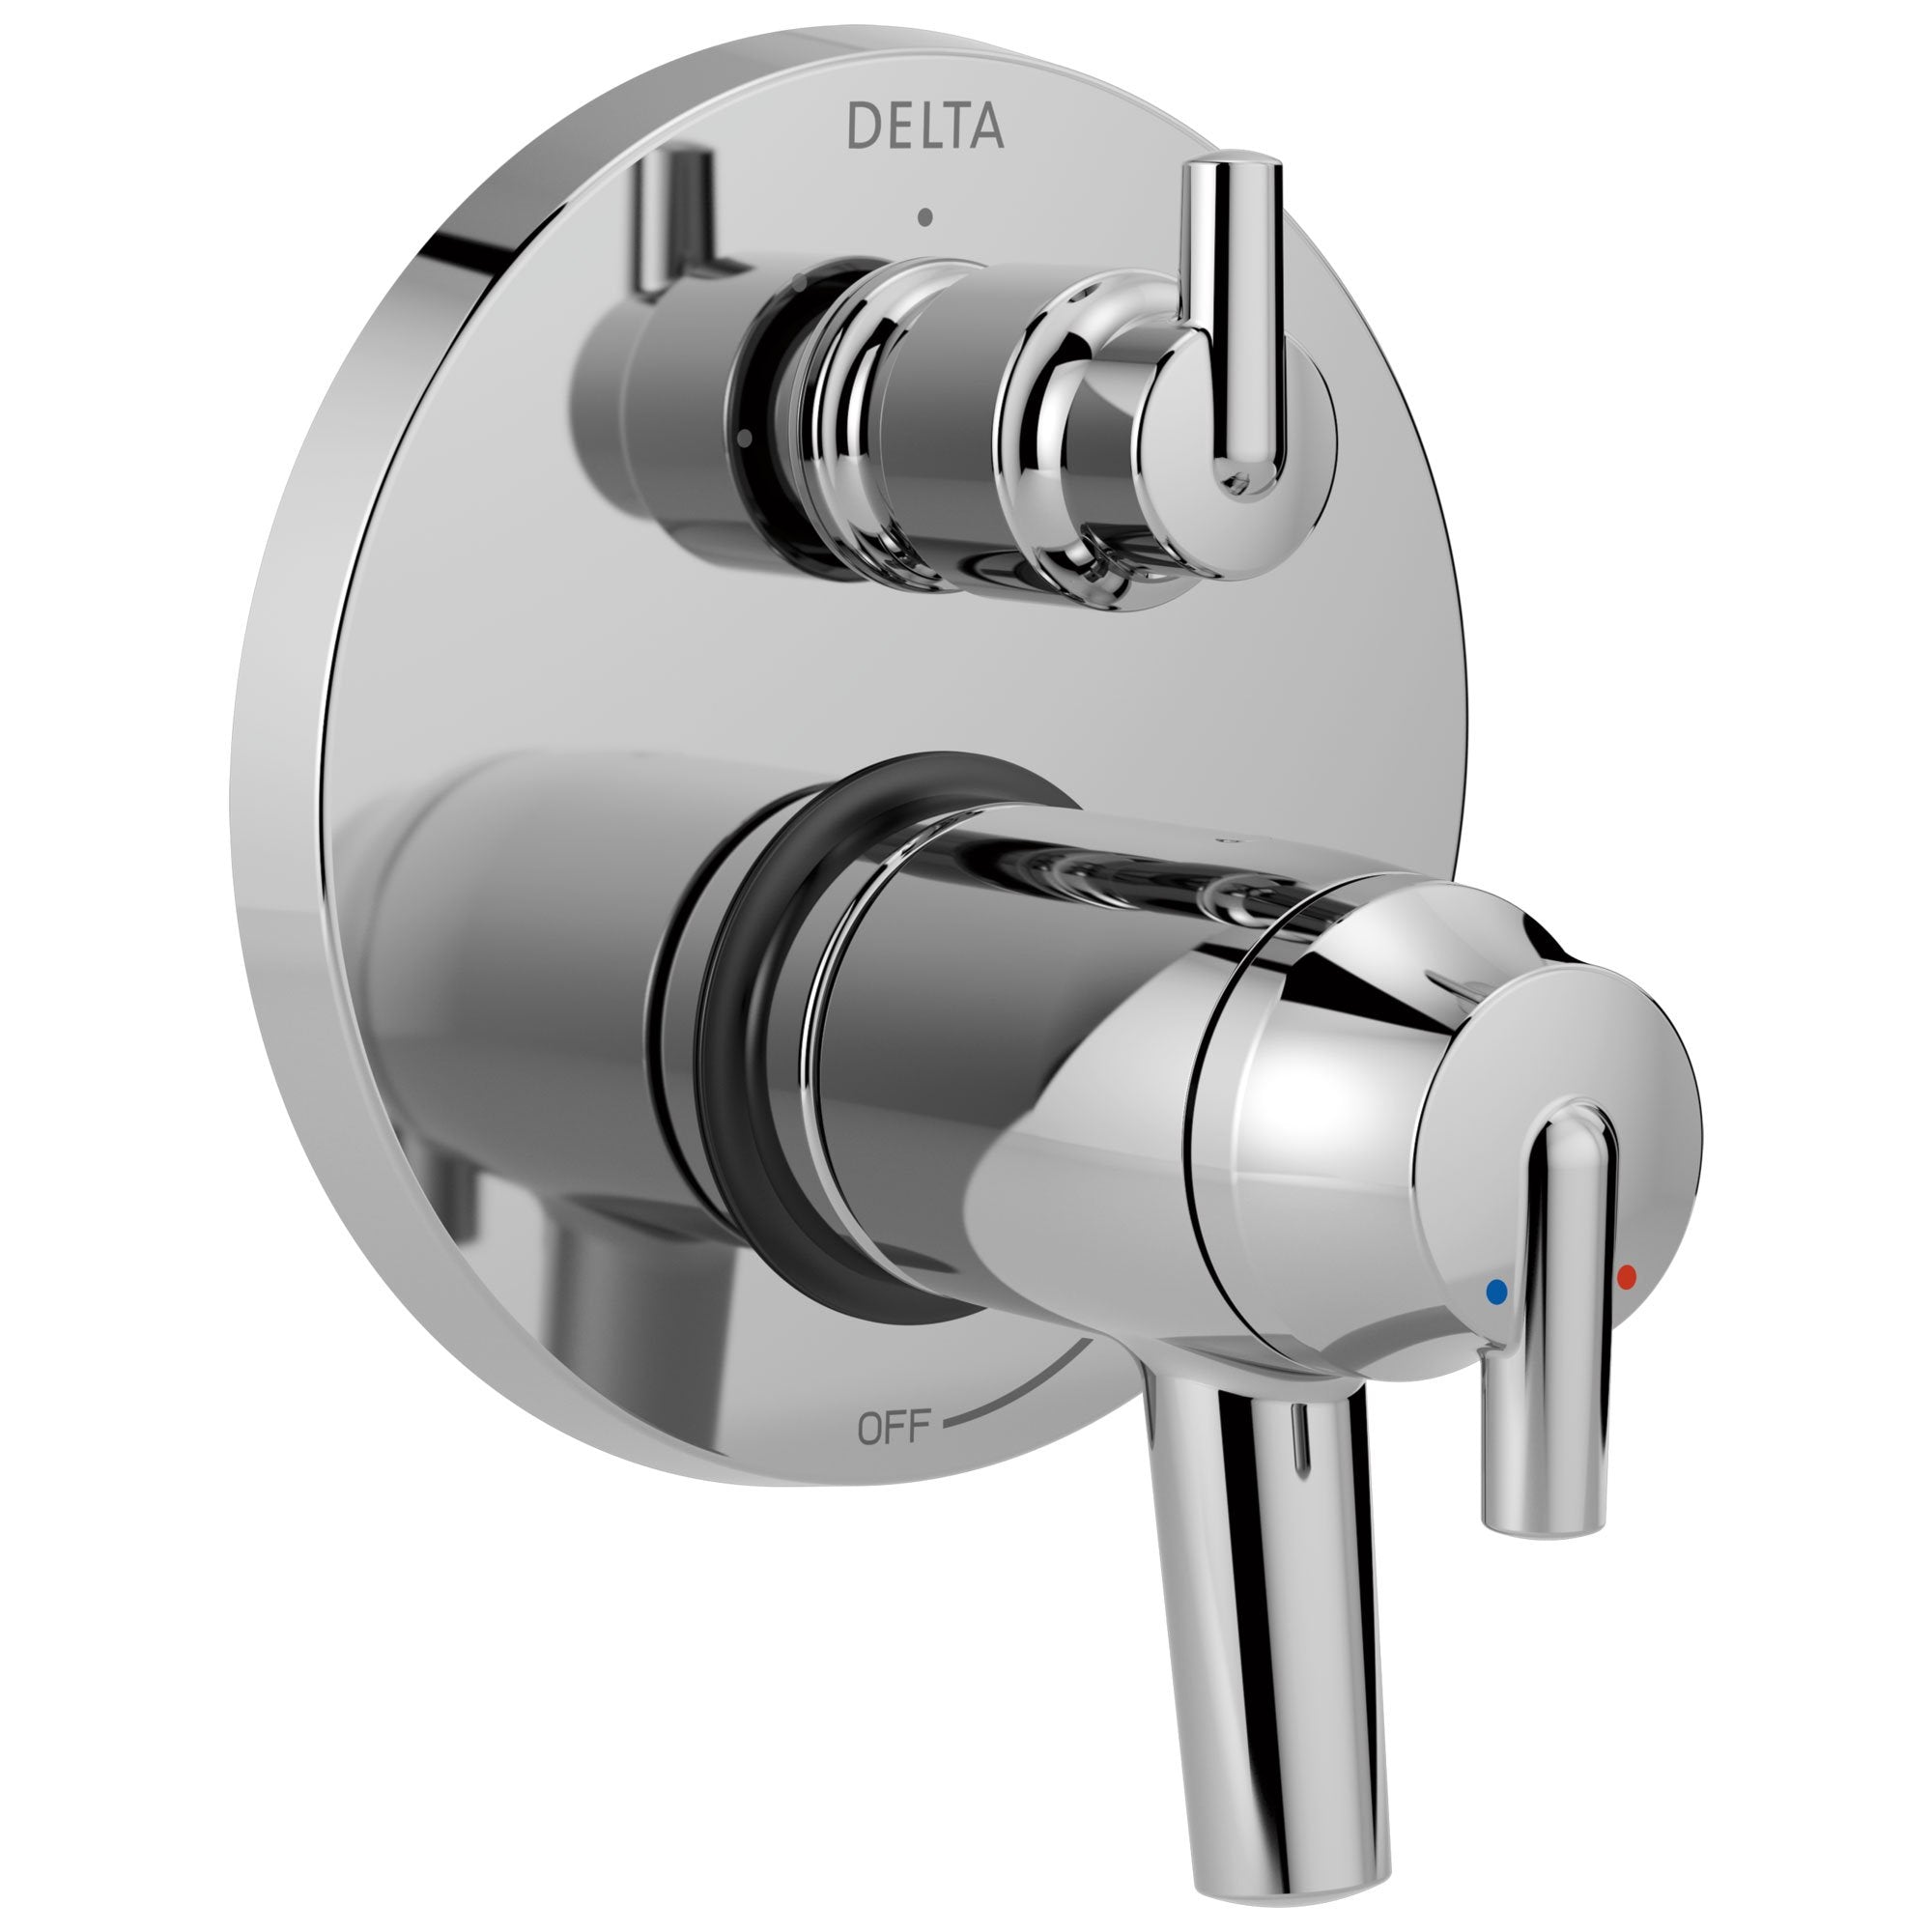 Delta Trinsic Chrome Thermostatic TempAssure 17T Shower Faucet Control with 3-Setting Integrated Diverter Includes Trim Kit and Rough-in Valve with Stops D2141V